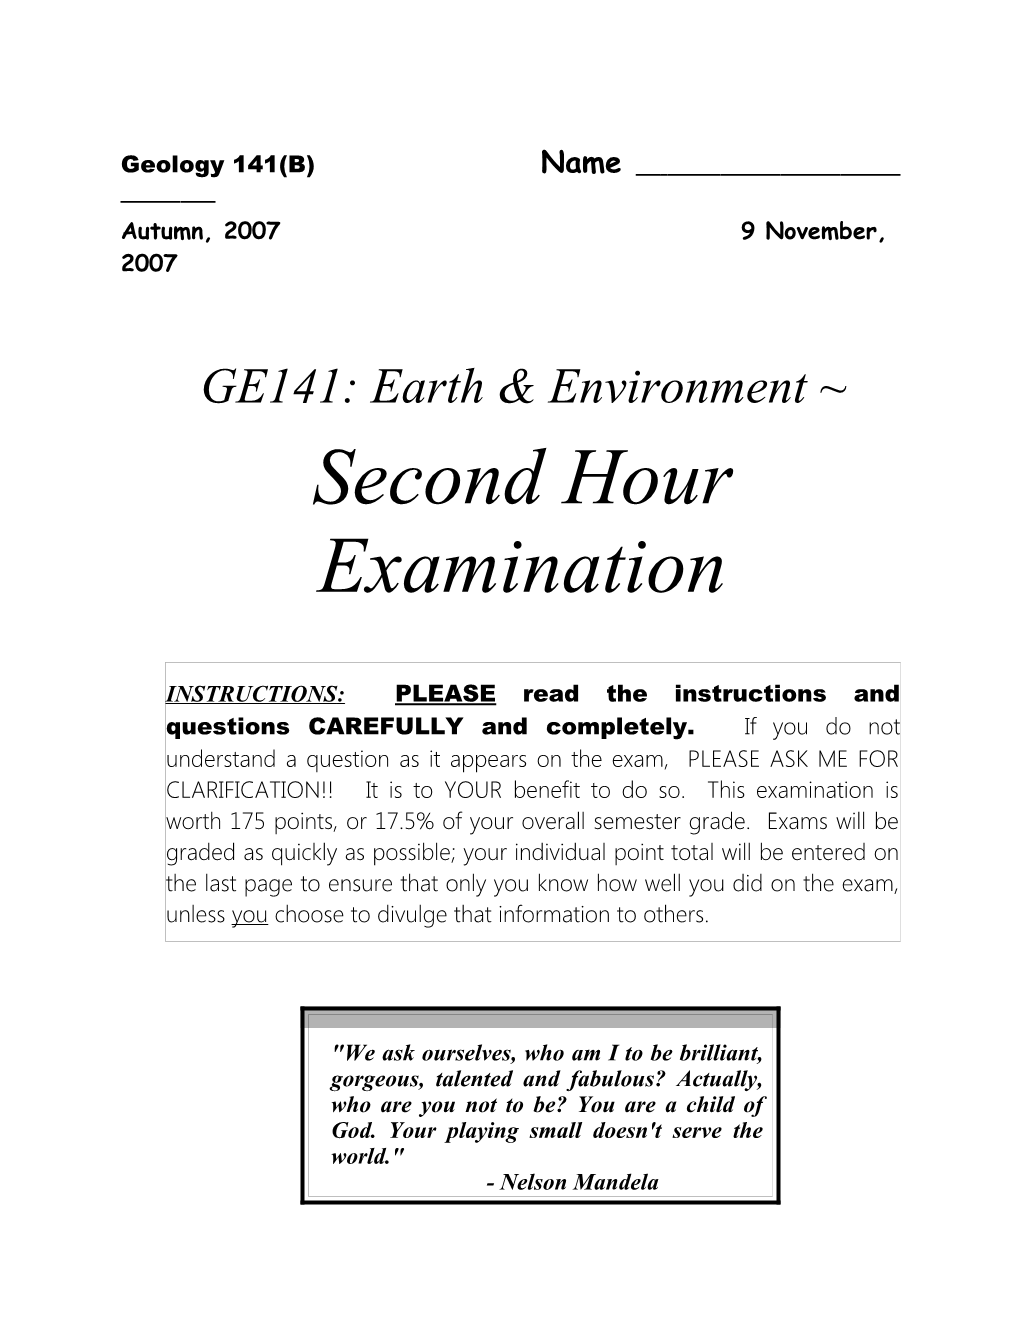 Geology 141 (B): Fall, 2007 Second Hour Examination Page 12